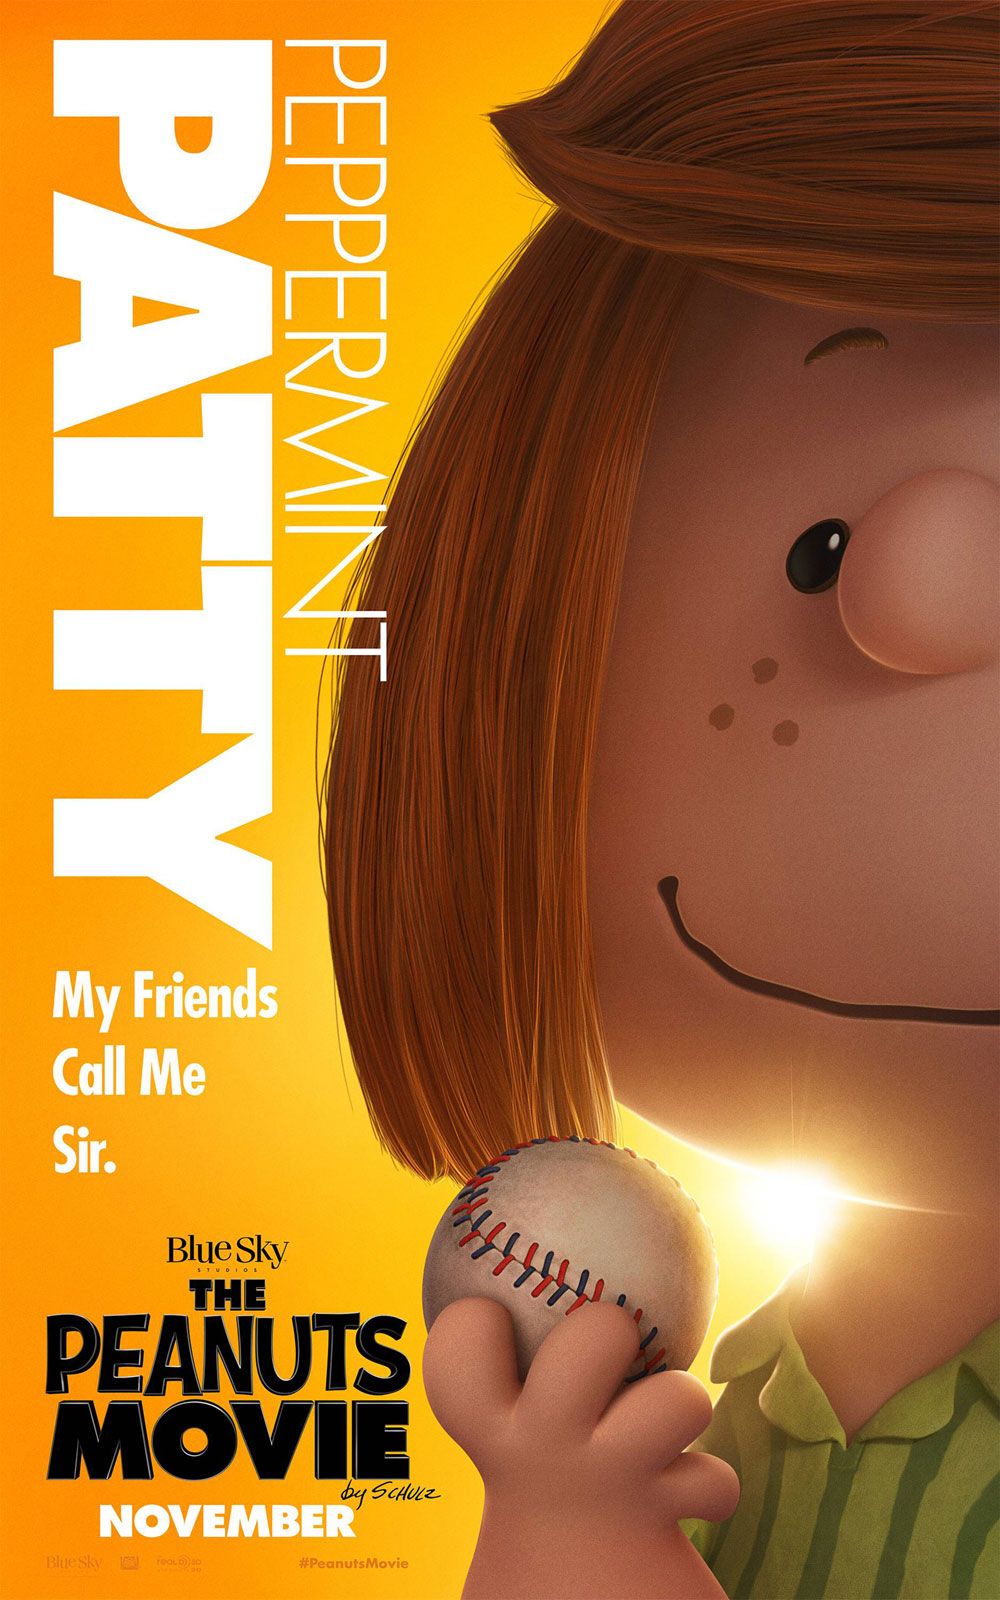 New Peanuts Movie Posters Spotlight Peppermint Patty and Marcie